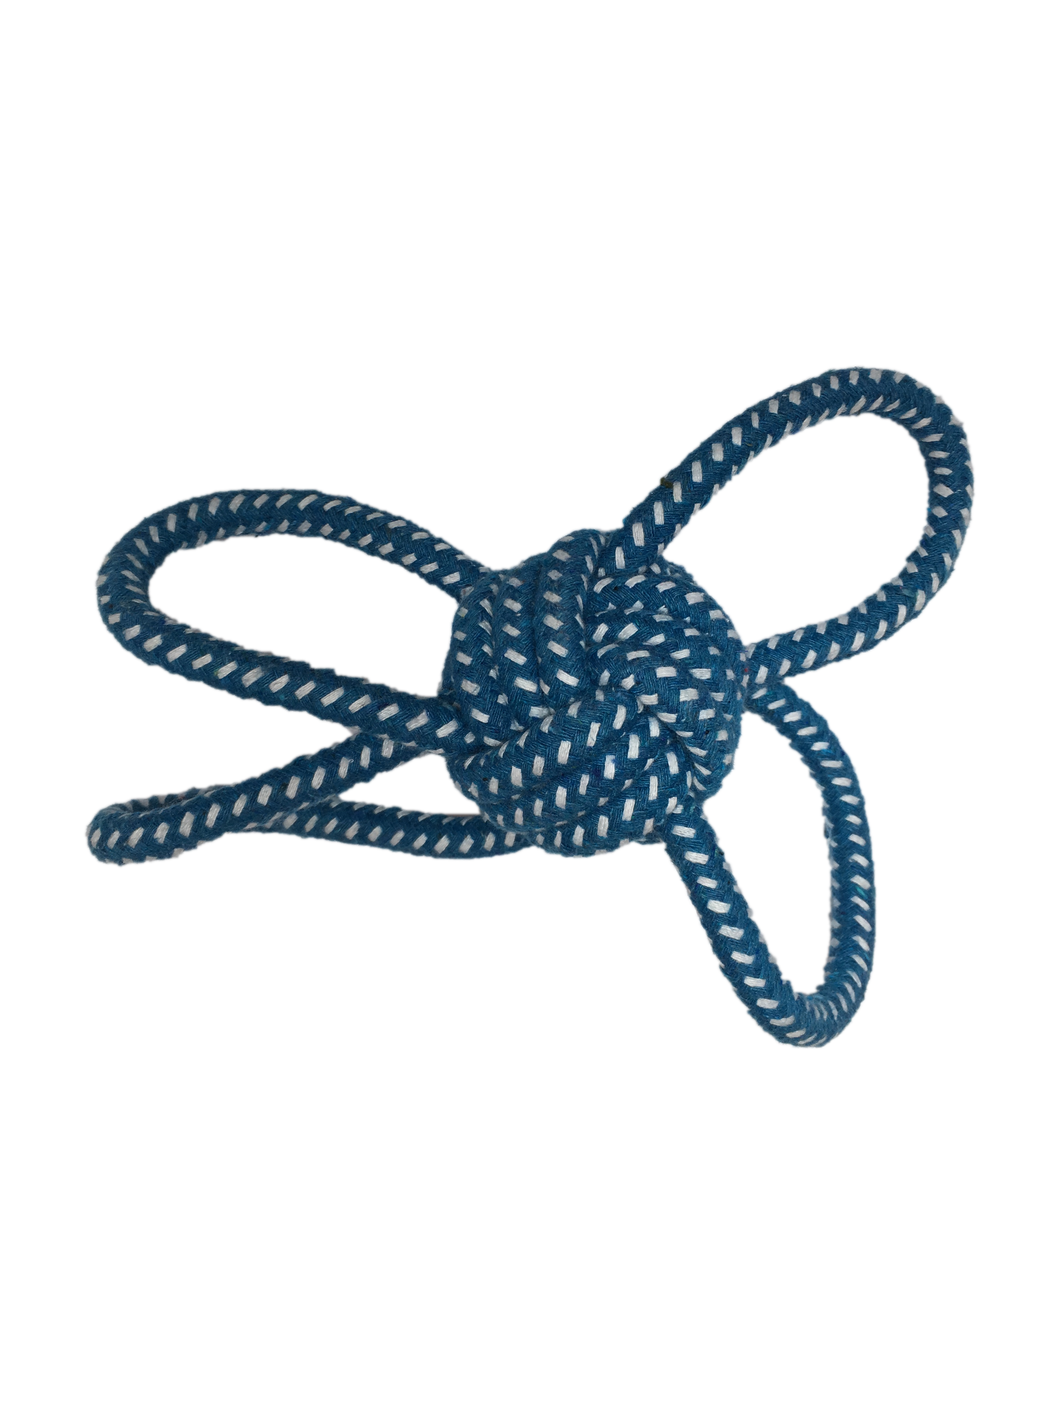 Butterfly Rope Ball S/M Dogs